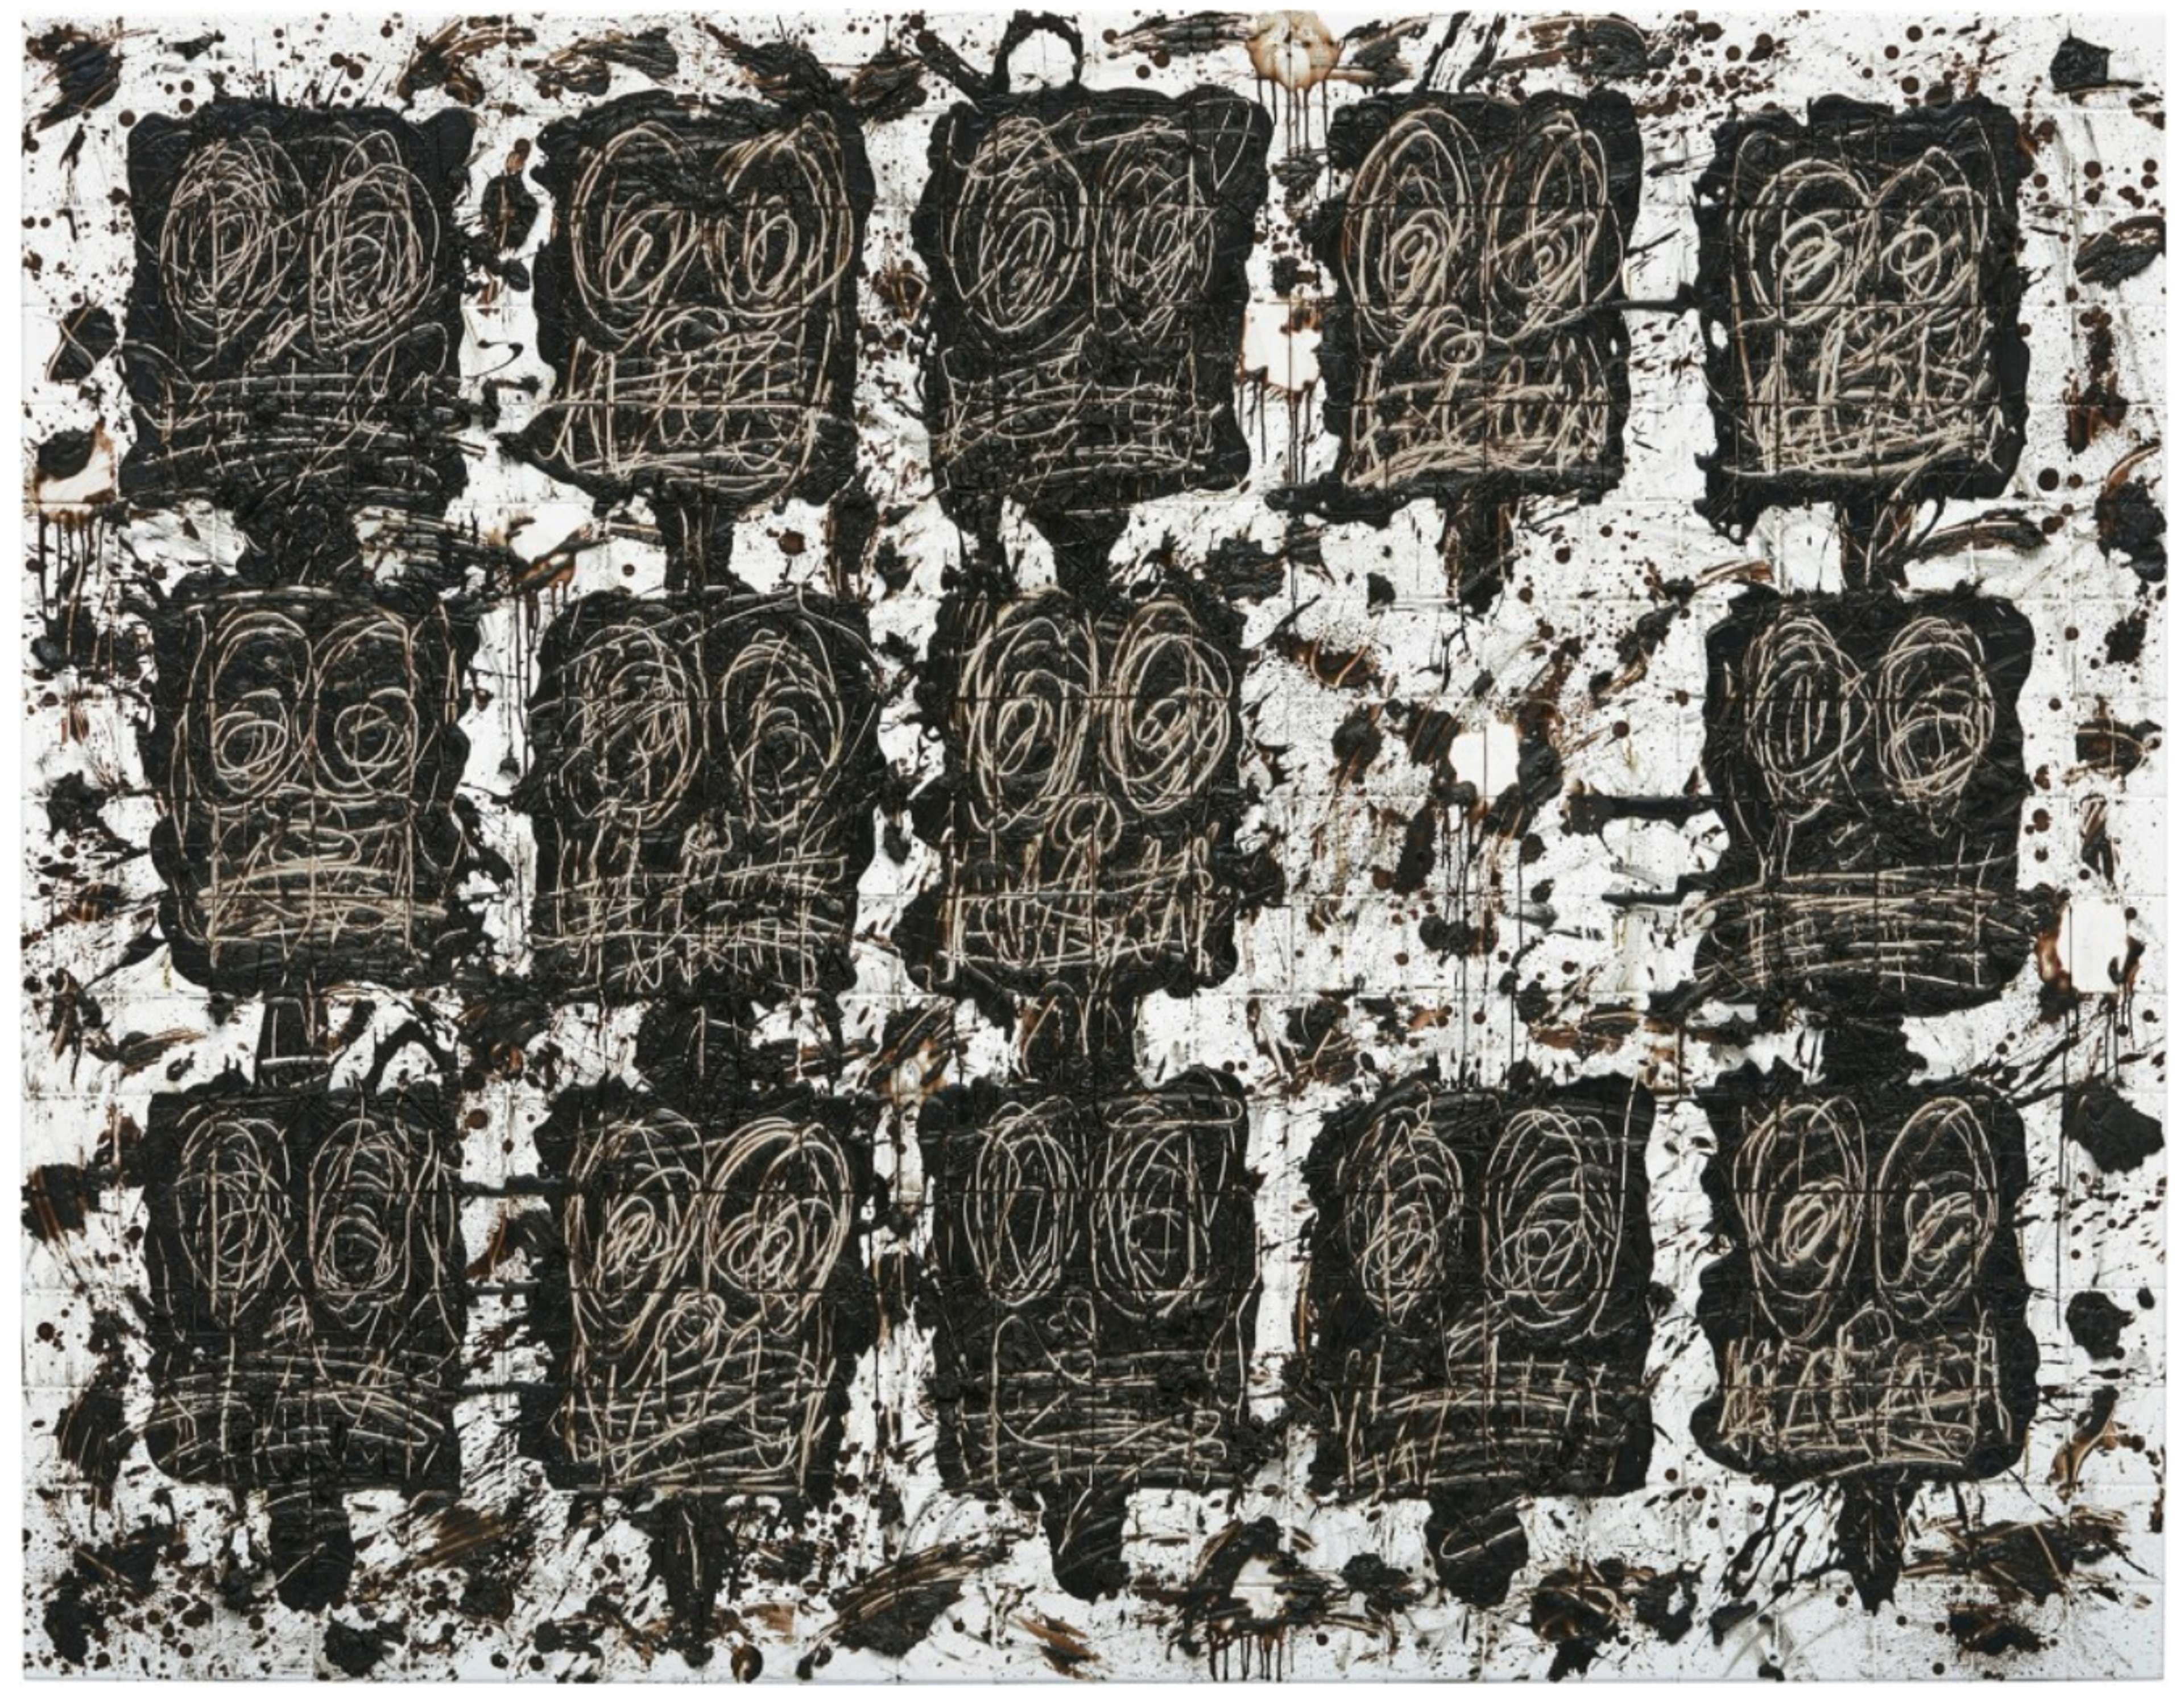 A Rashid Johnson canvas displaying five totemic rows of box faces with scribbled and scrawled eyes and mouths, leaving a void where one face would have been.